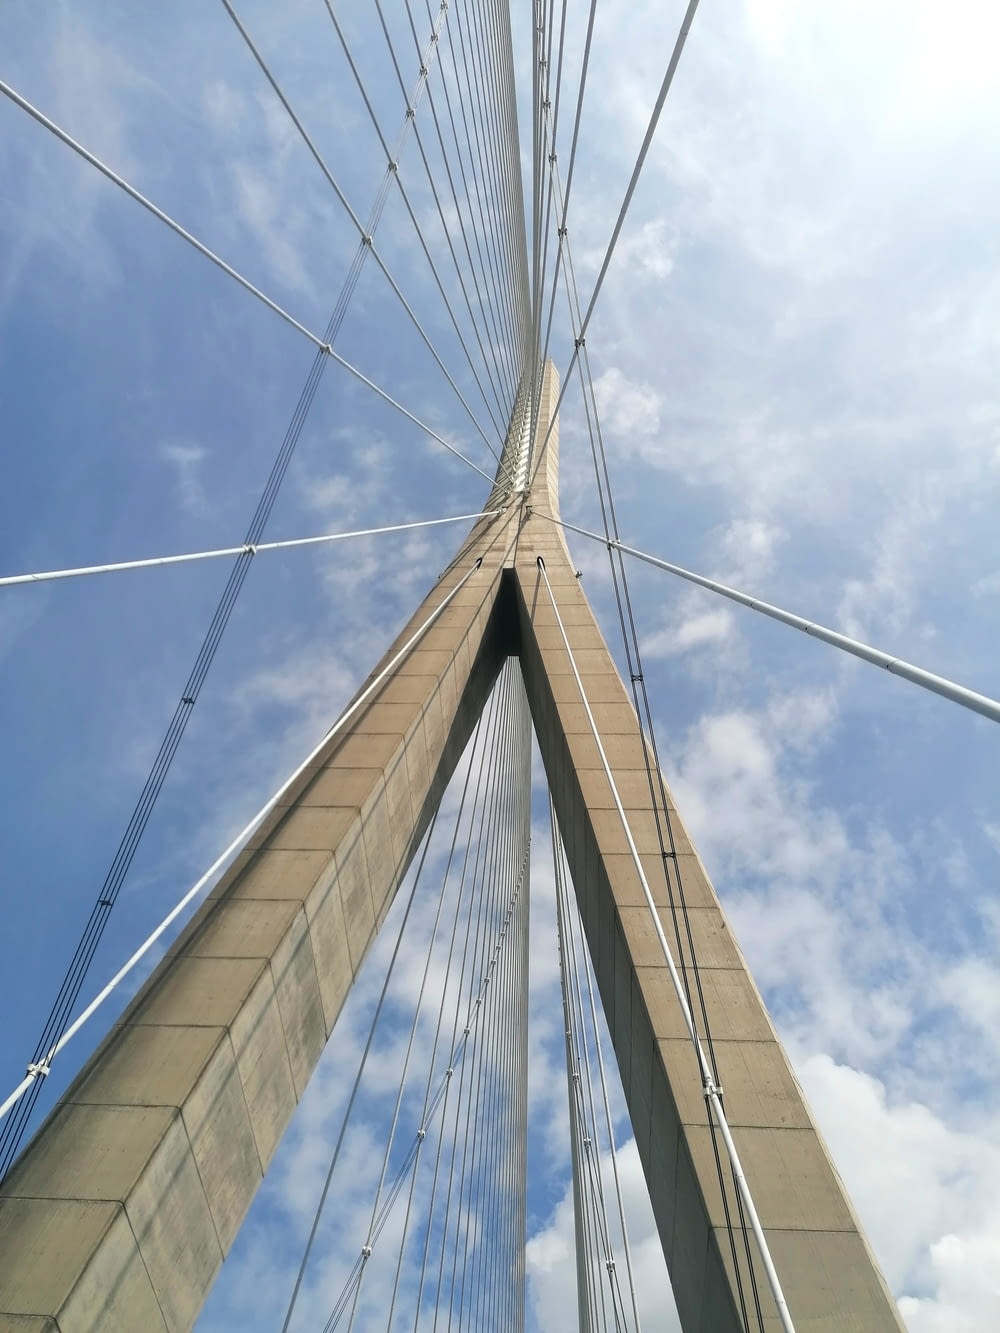 looking up at the top of a tall bridge